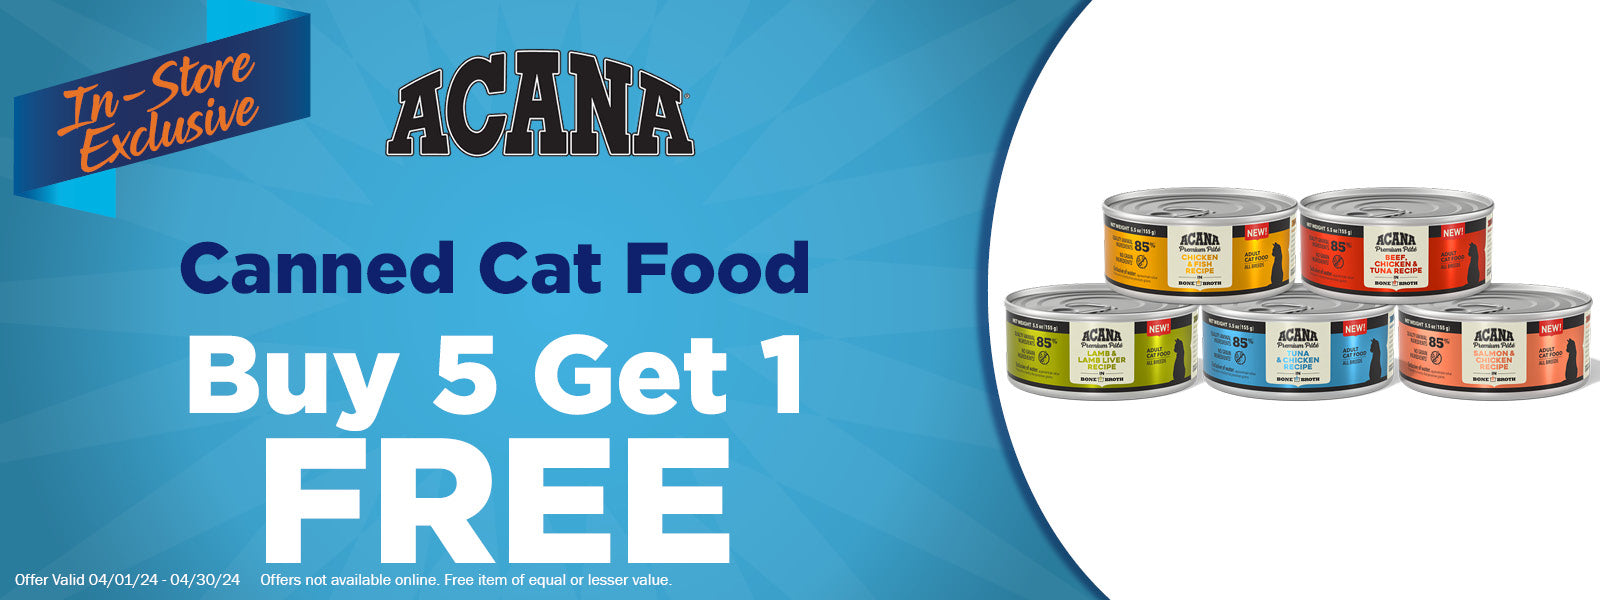 In-Store Exclusive Offer - Acana Canned Cat Food Buy 5 Get 1 Free